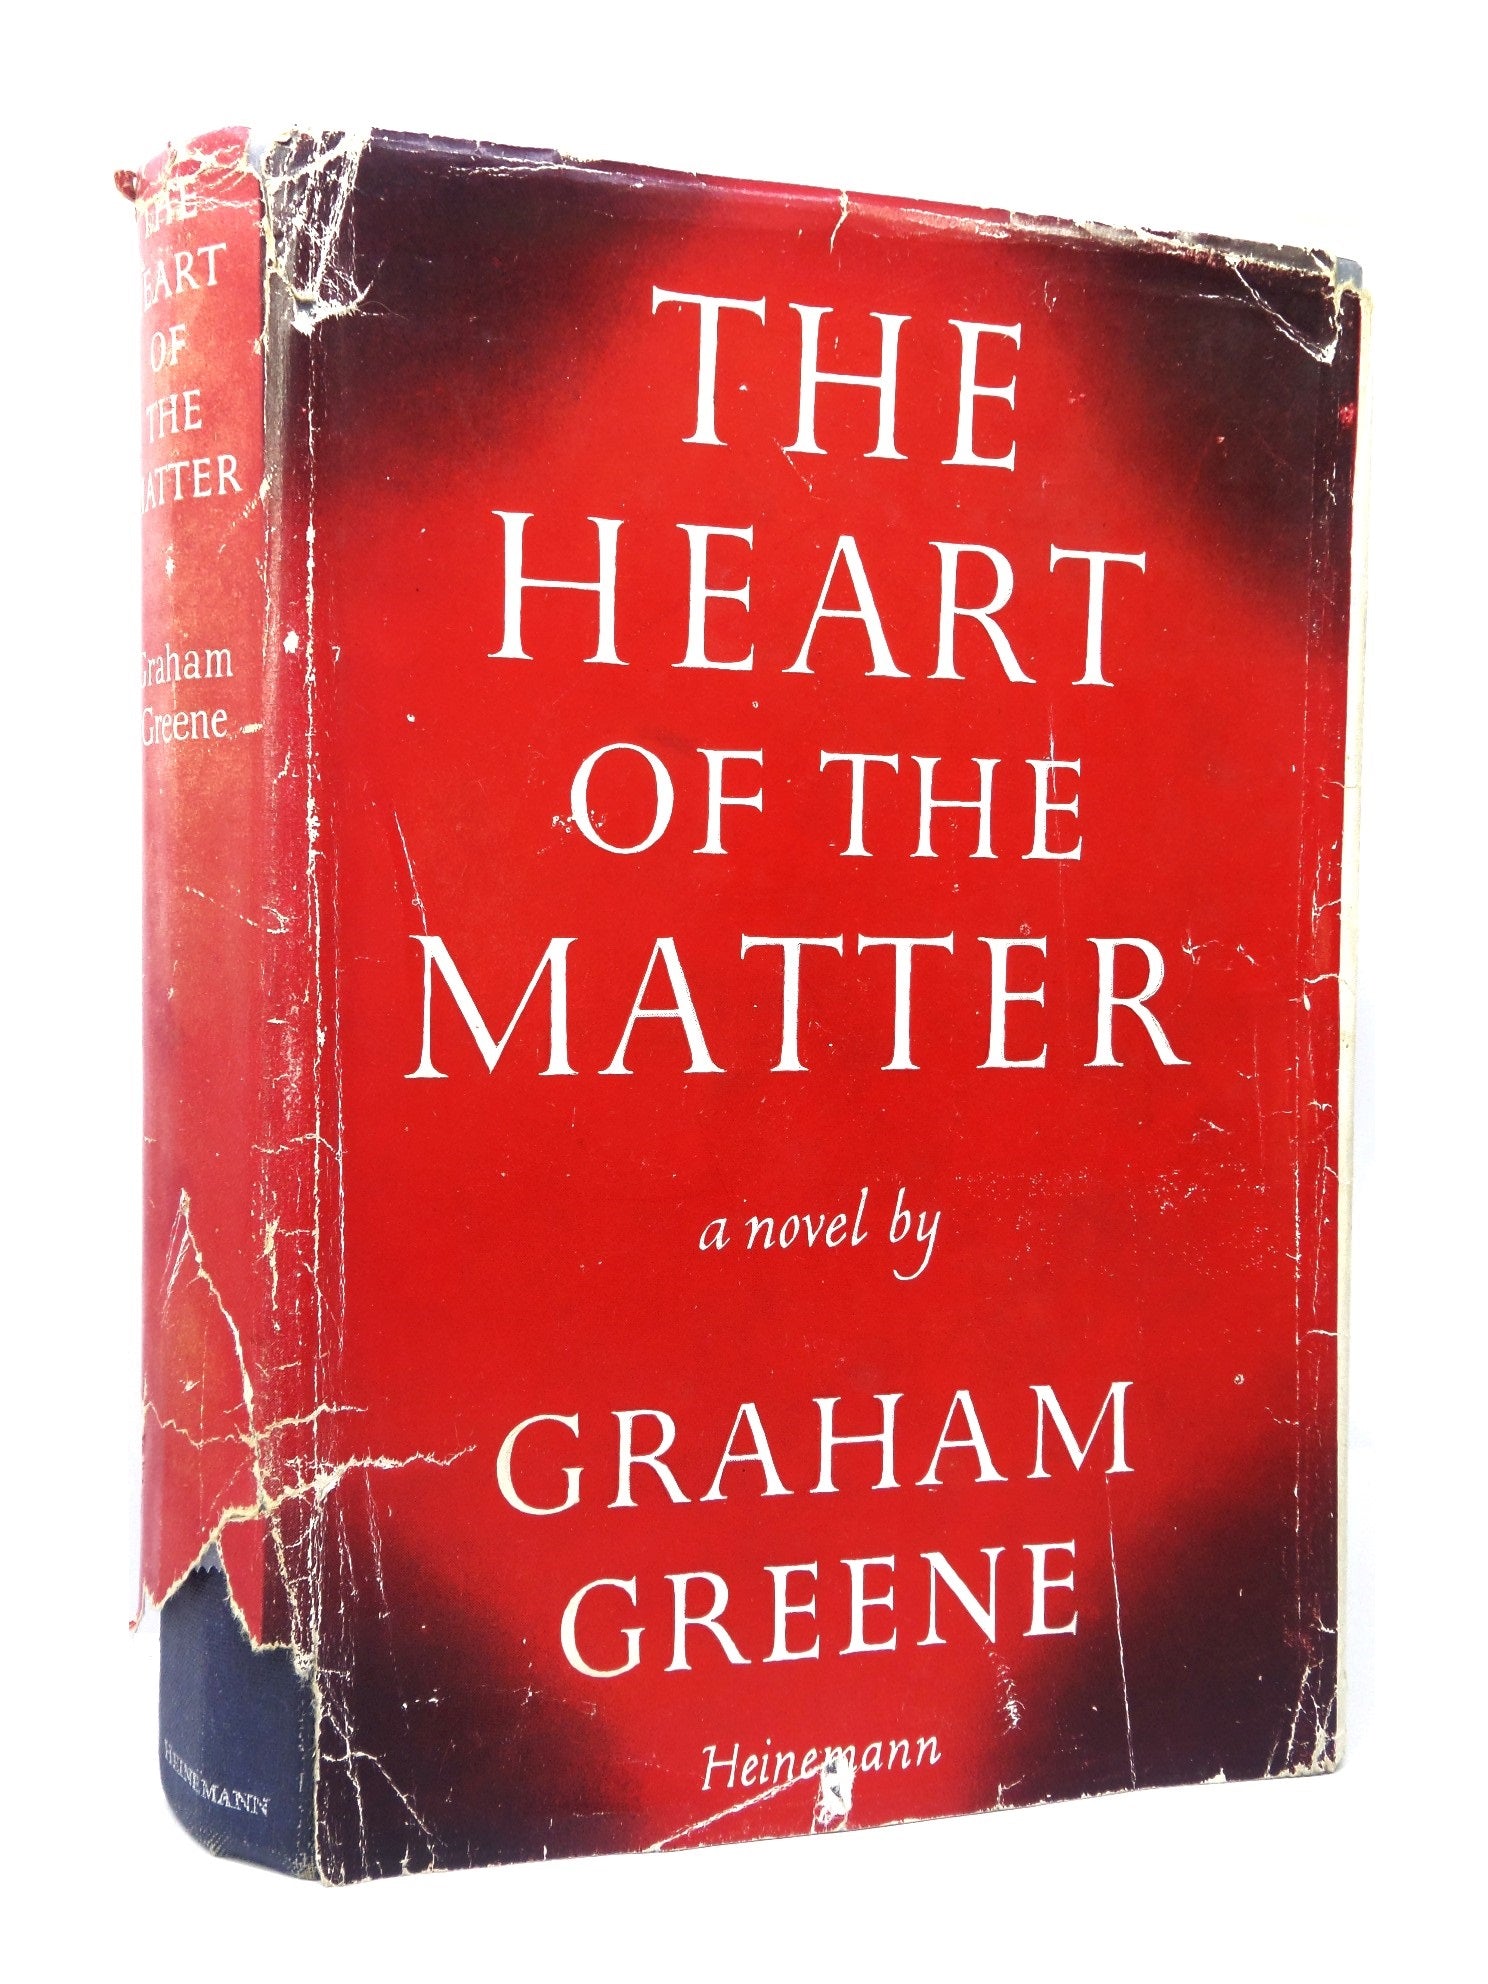 THE HEART OF THE MATTER BY GRAHAM GREENE 1948 FIRST EDITION